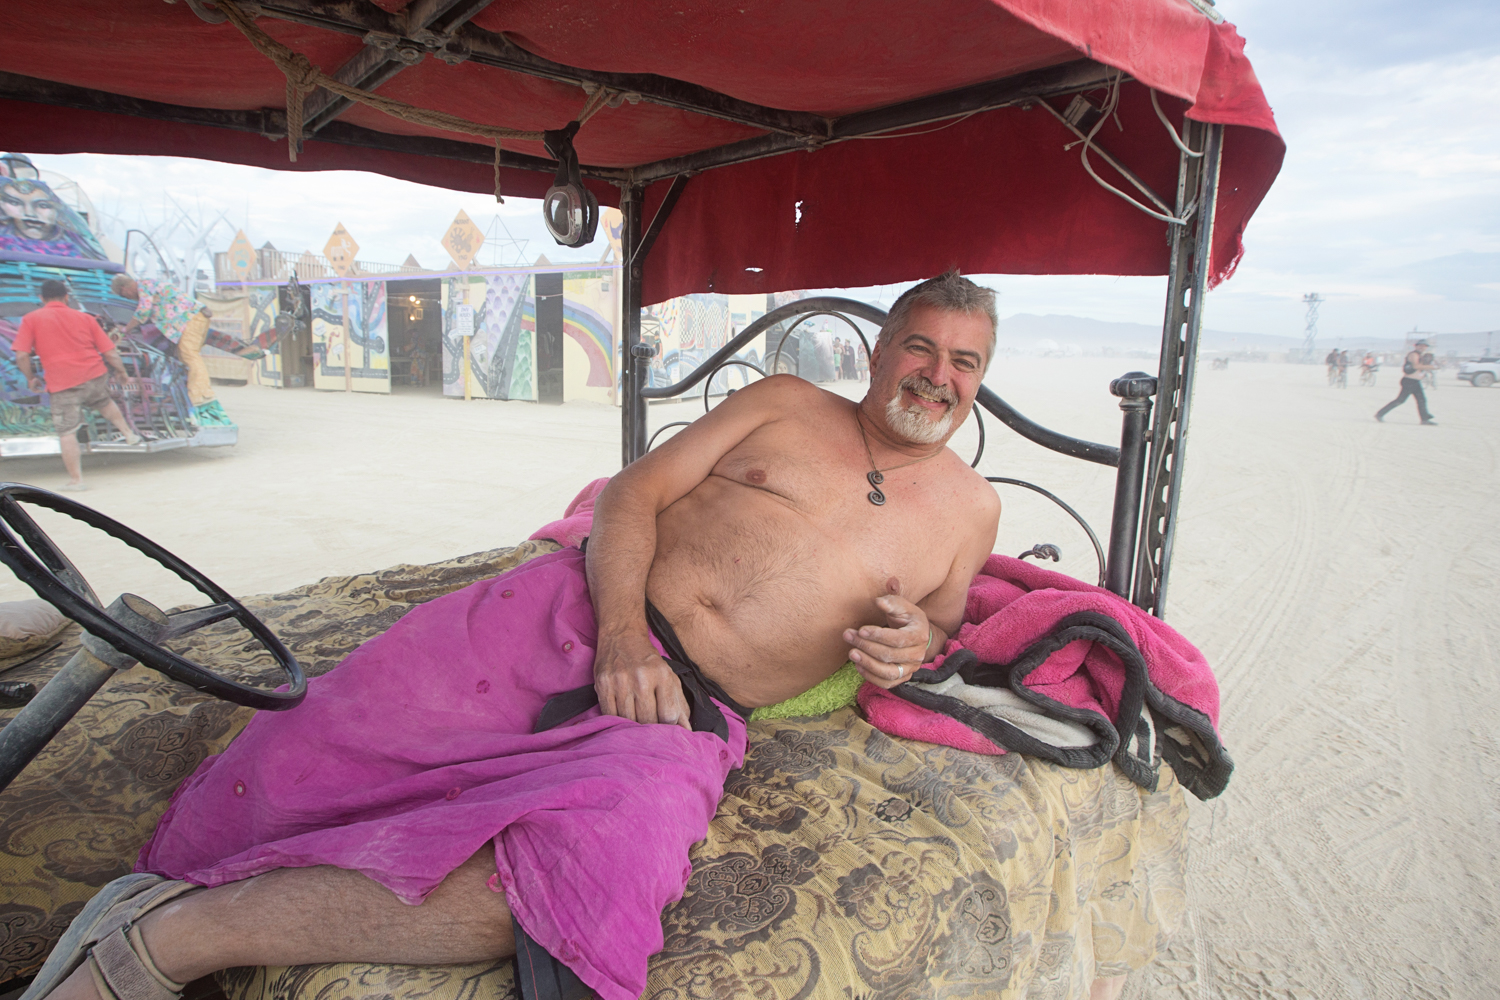 Doug from Seattle lounges in his bed car. An eight-time burner, he likes to keep things simple. There is no engine noise, and no music. Perfect for a low-key cruise of the playa